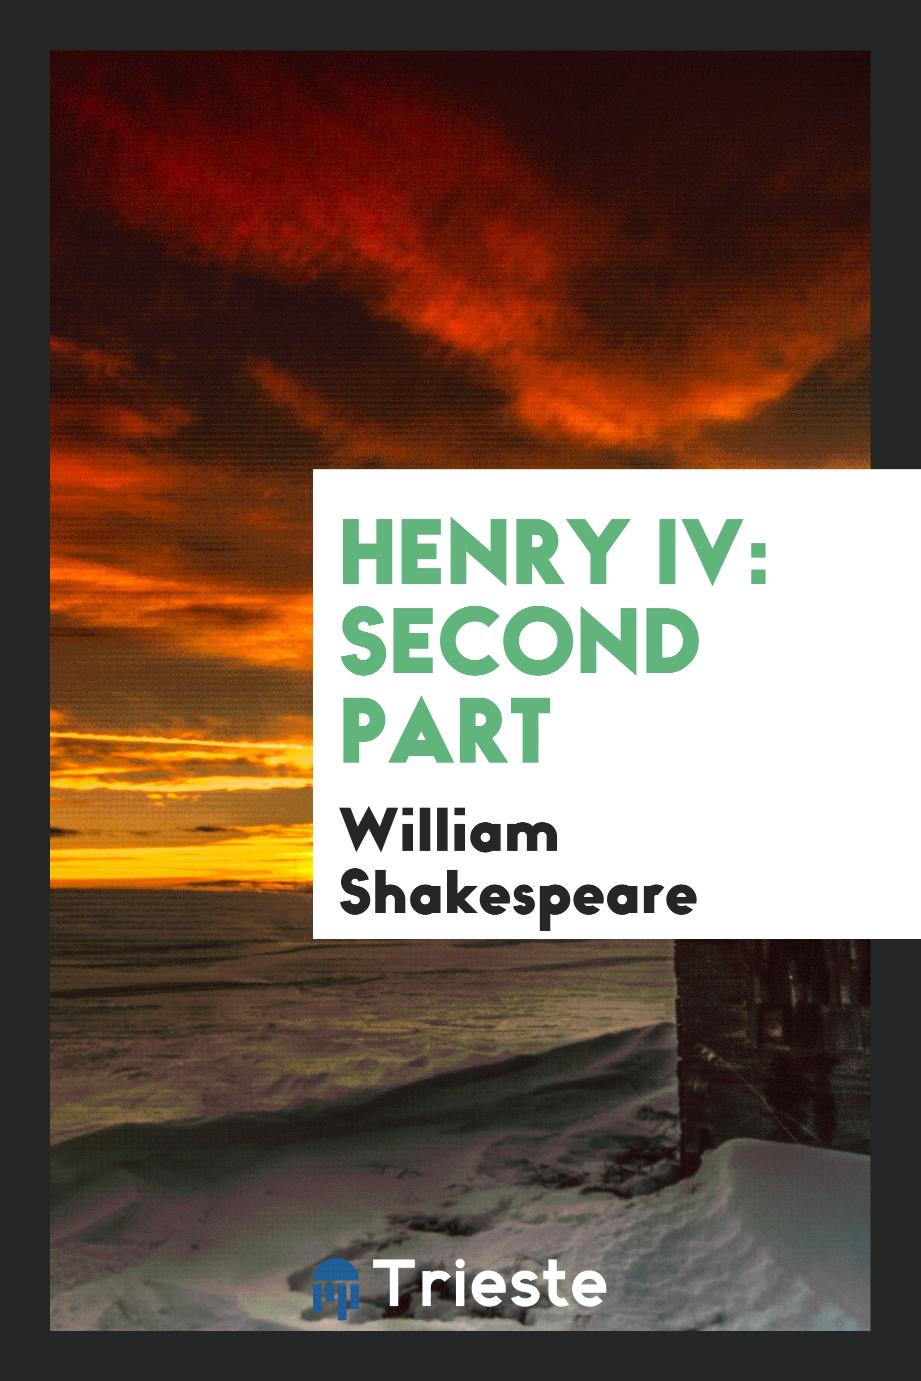 Henry IV: second part